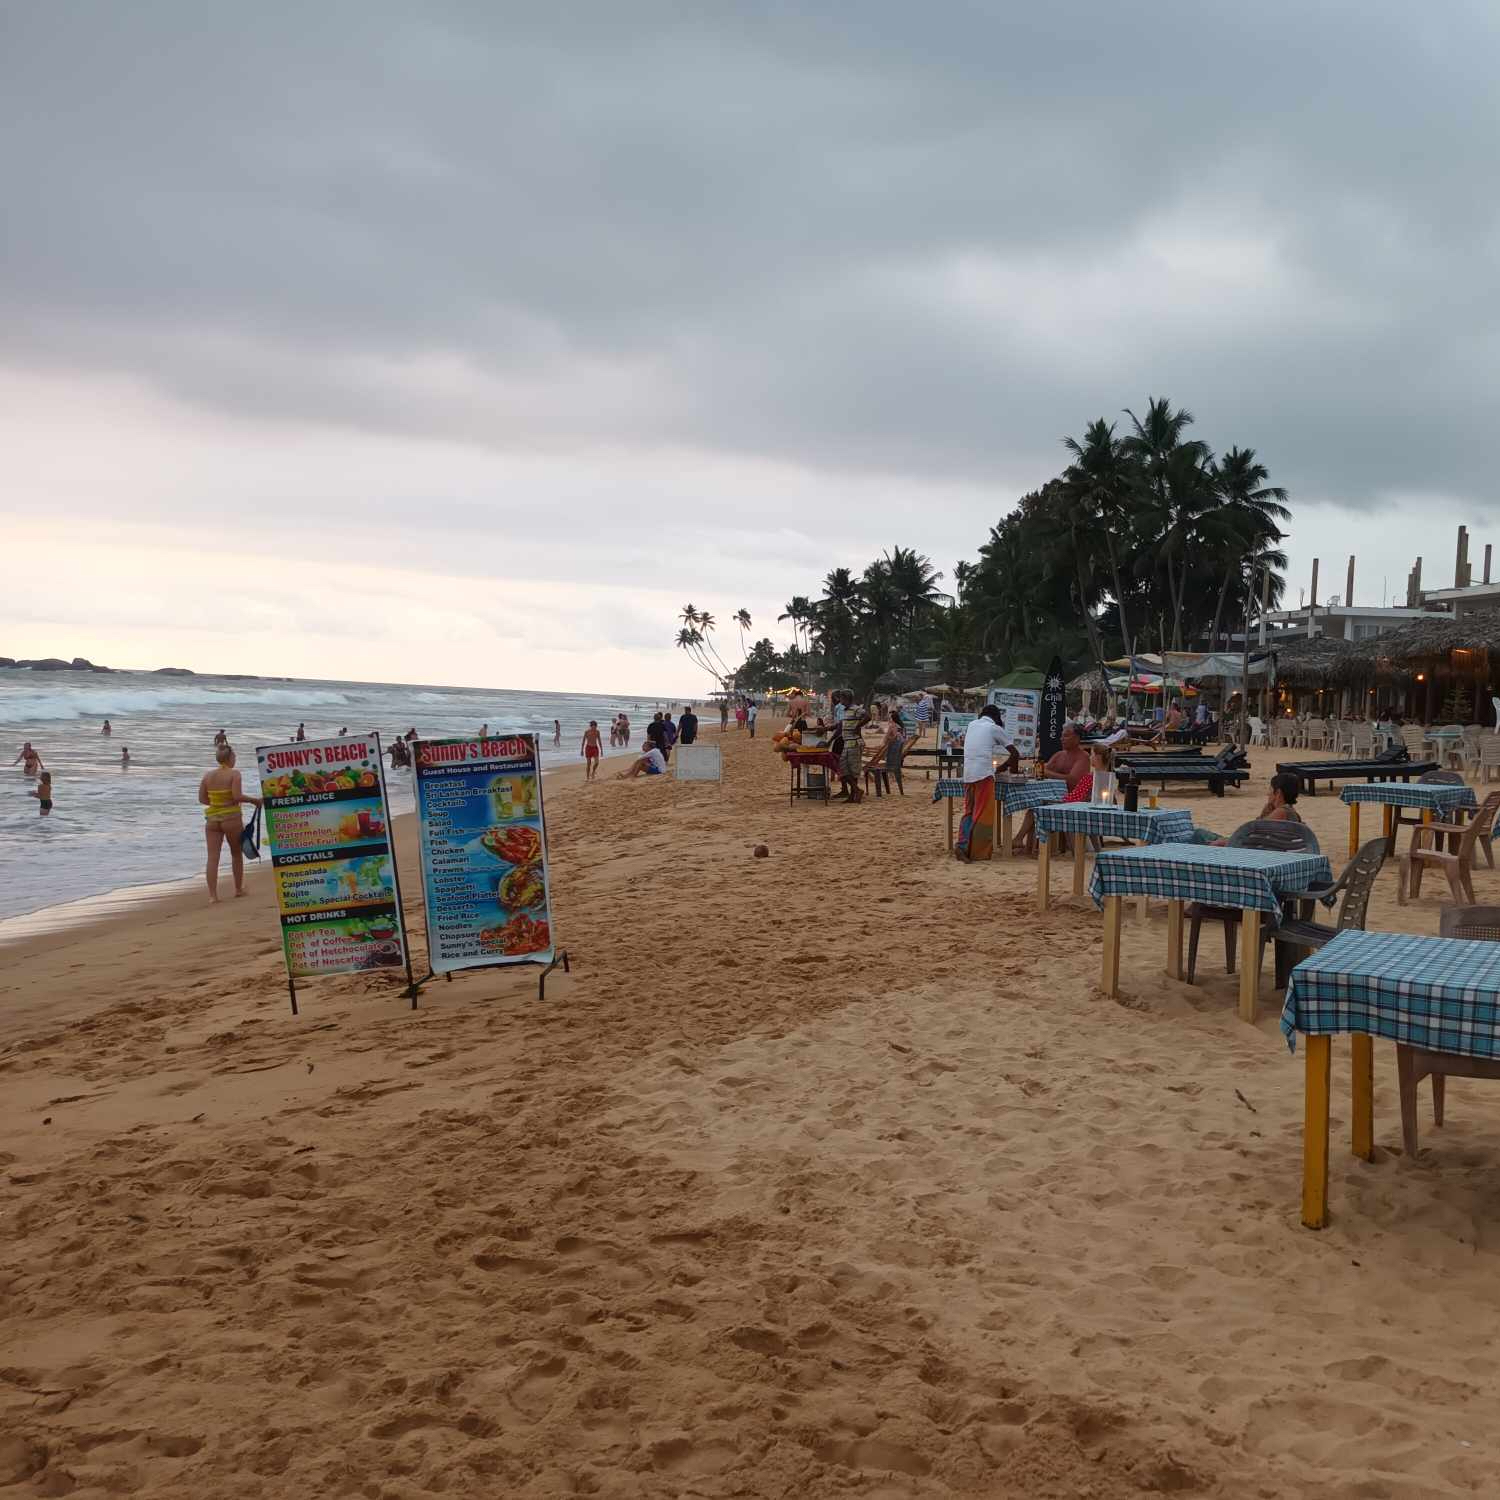 A picture of a beach and sea with tables and sunbeds. Trees and gray sky in the background.